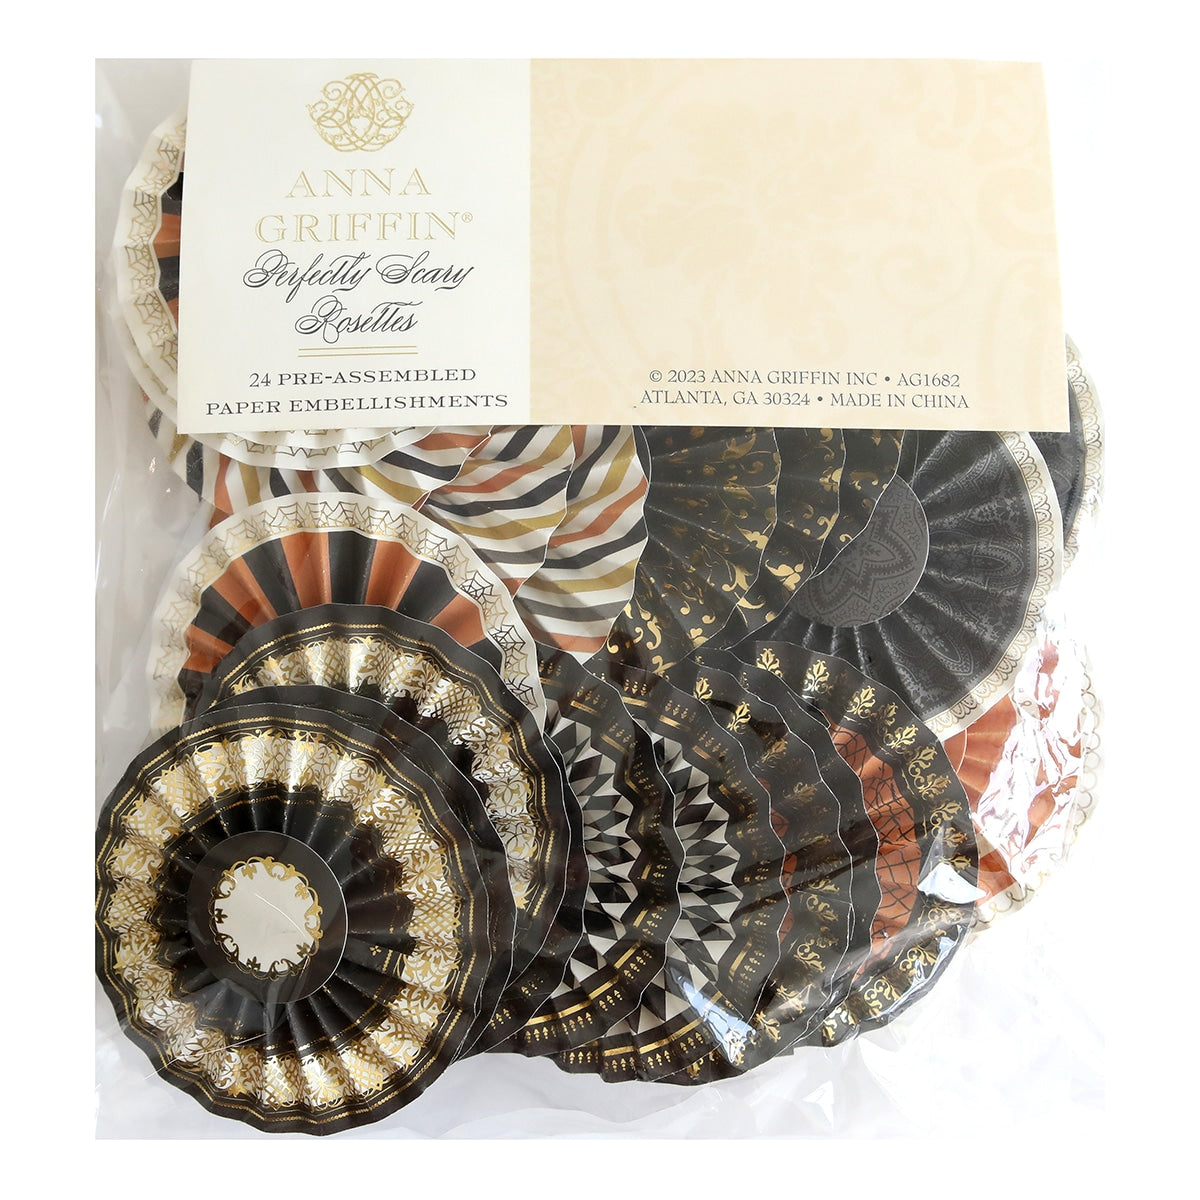 A bag of Perfectly Scary Rosettes with gold and black designs.